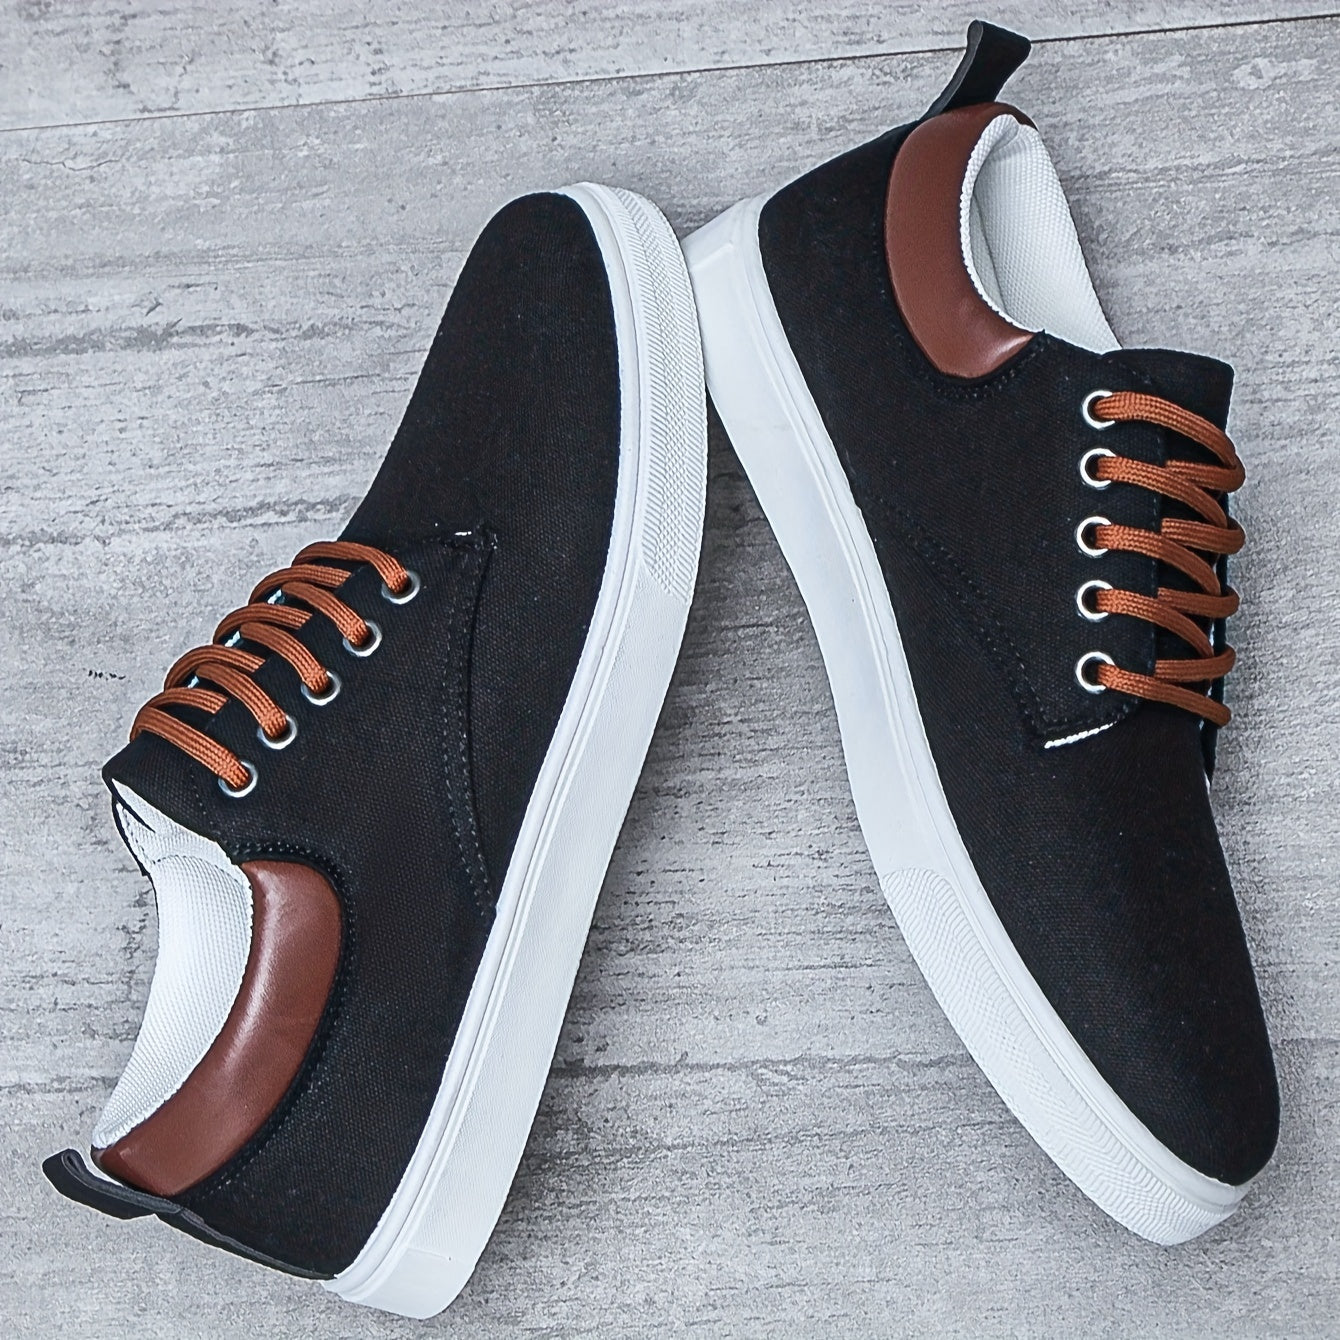 Men's Trendy Solid Skate Shoes, Comfy Non Slip Casual Lace Up Sneakers For Men's Outdoor Activities